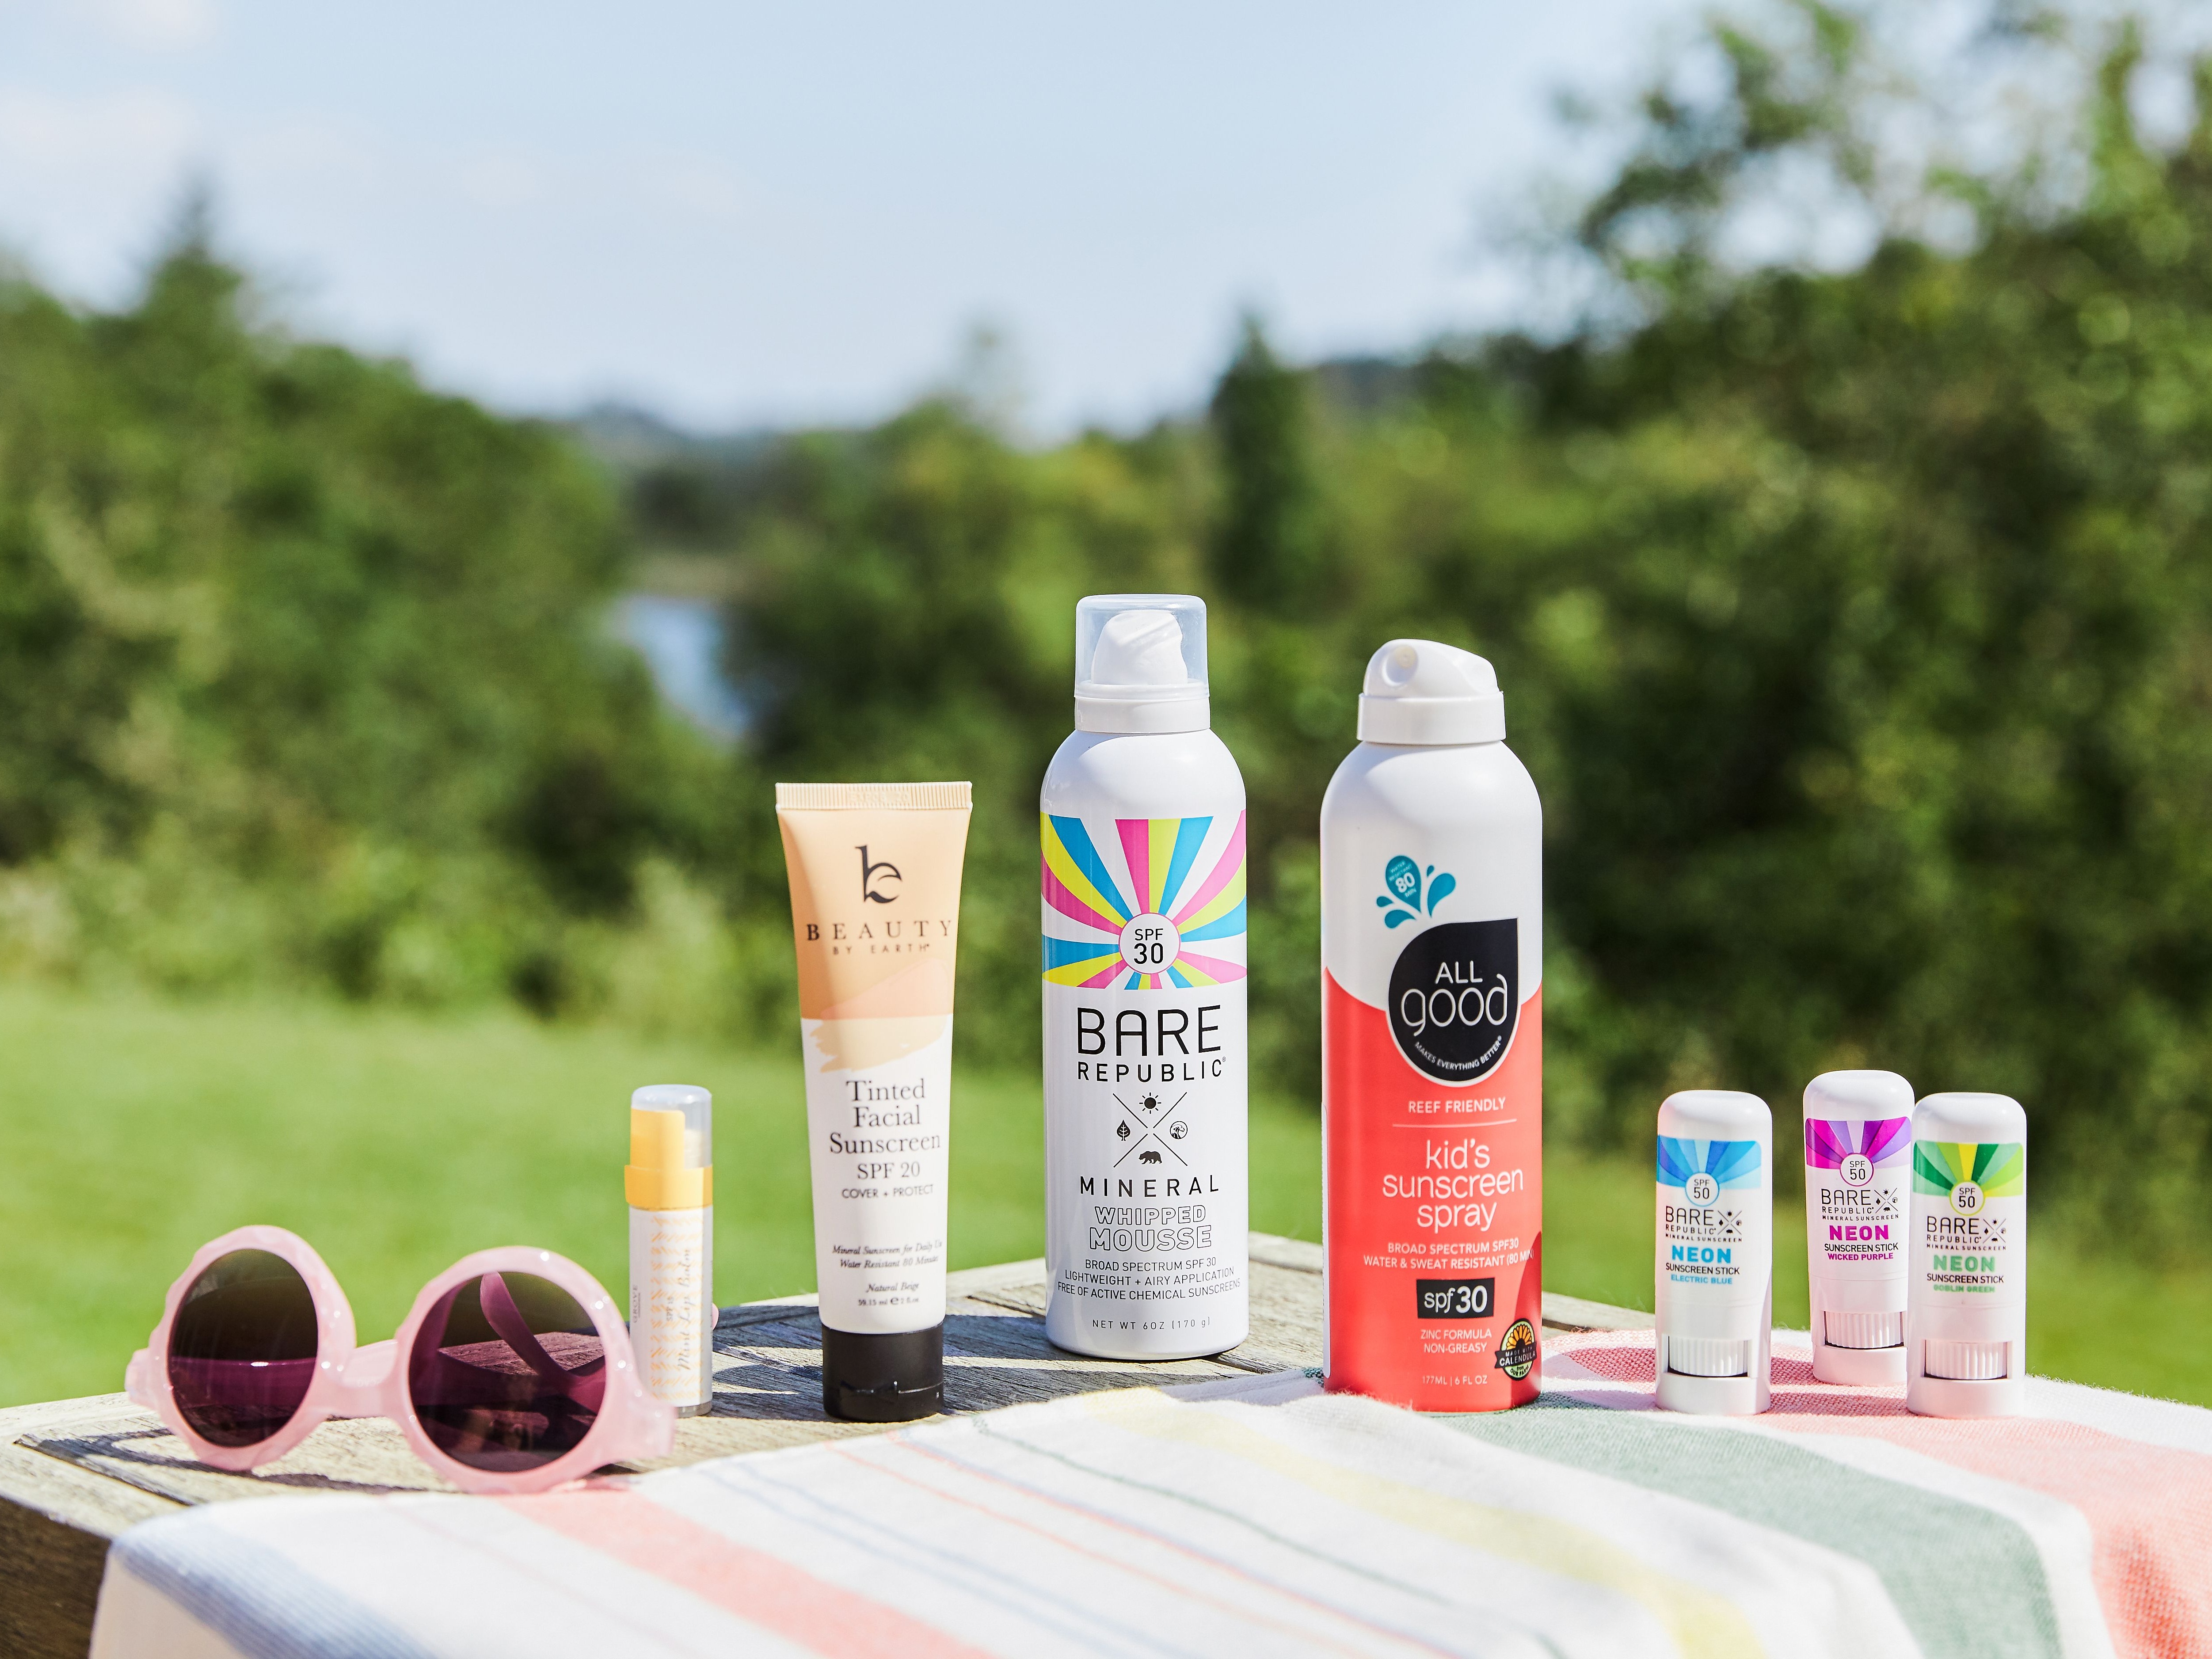 Images of different brands of sunscreen next to a pair of sunglasses on the table